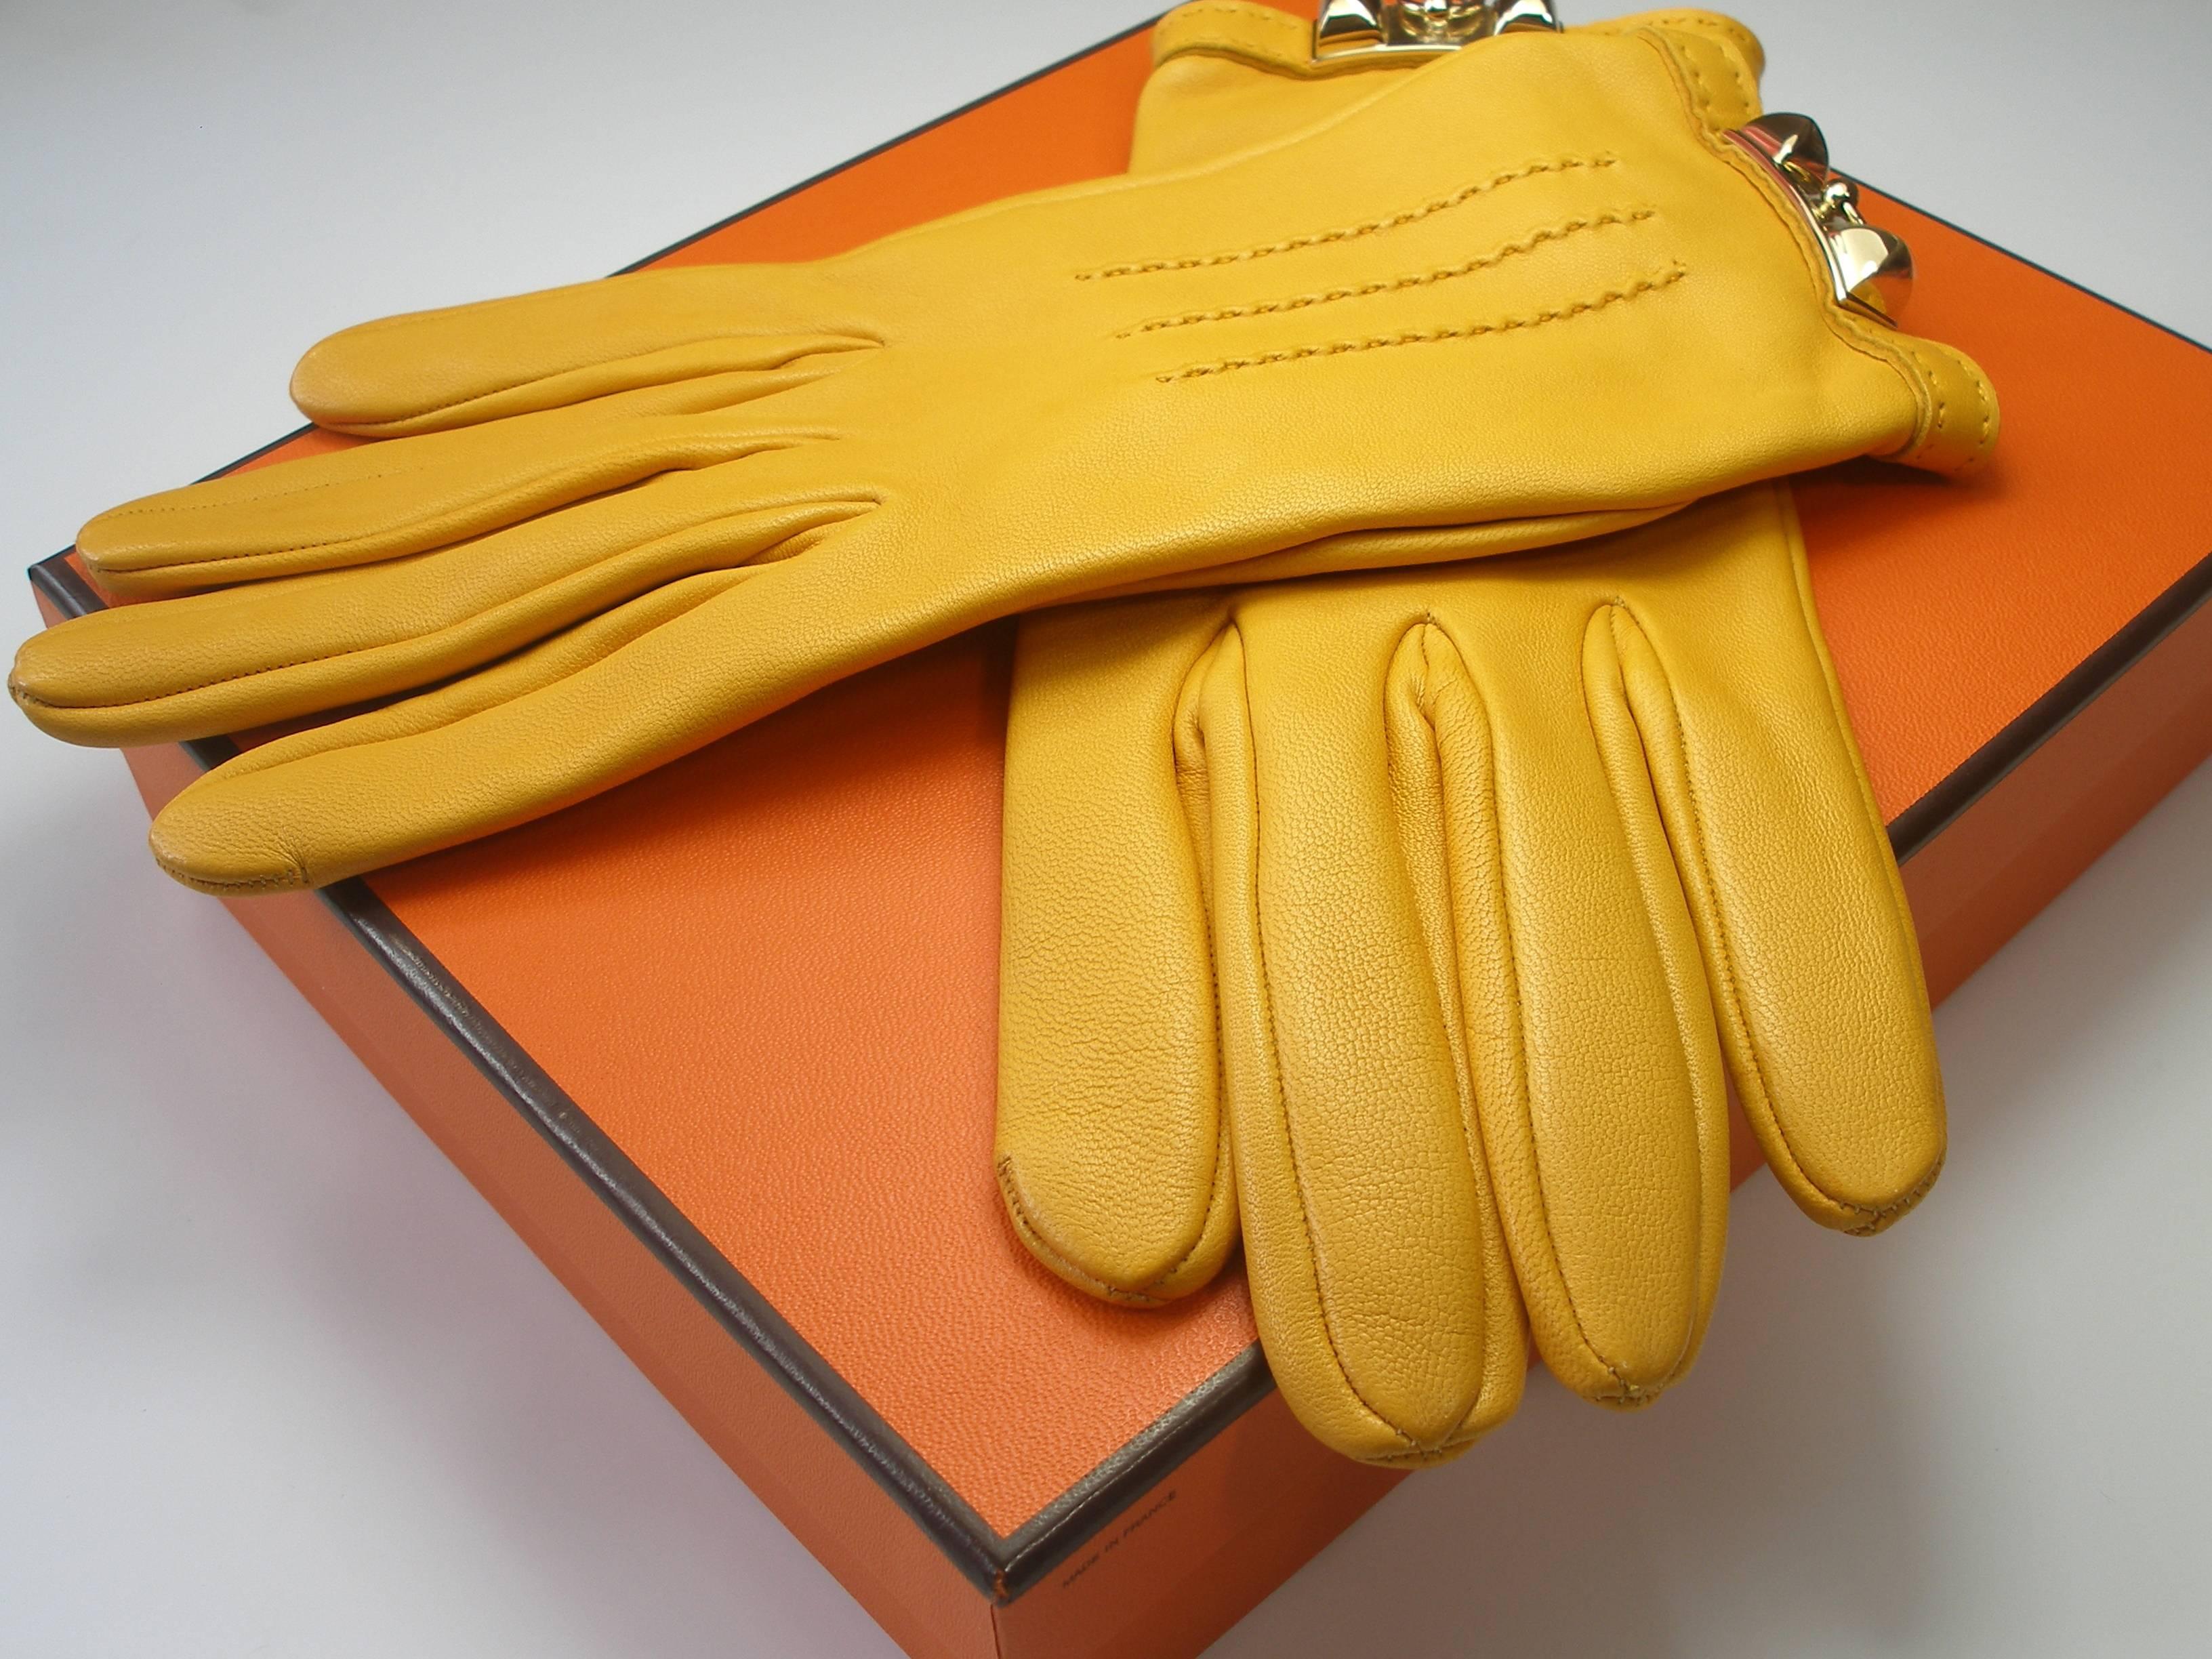 MAGNIFIC Hermès Gloves Médor 
DIFFICULTE TO FIND IN THIS COLOR 
Color : Yellow
Size 5 ( french size ) : 7.5 
Lambskin leather with silk lining
Palladium Hardware
Rétail price 890 usd 
Its comes with Hermés box and ribbon 
INTERNATIONAL BUYERS TAXES